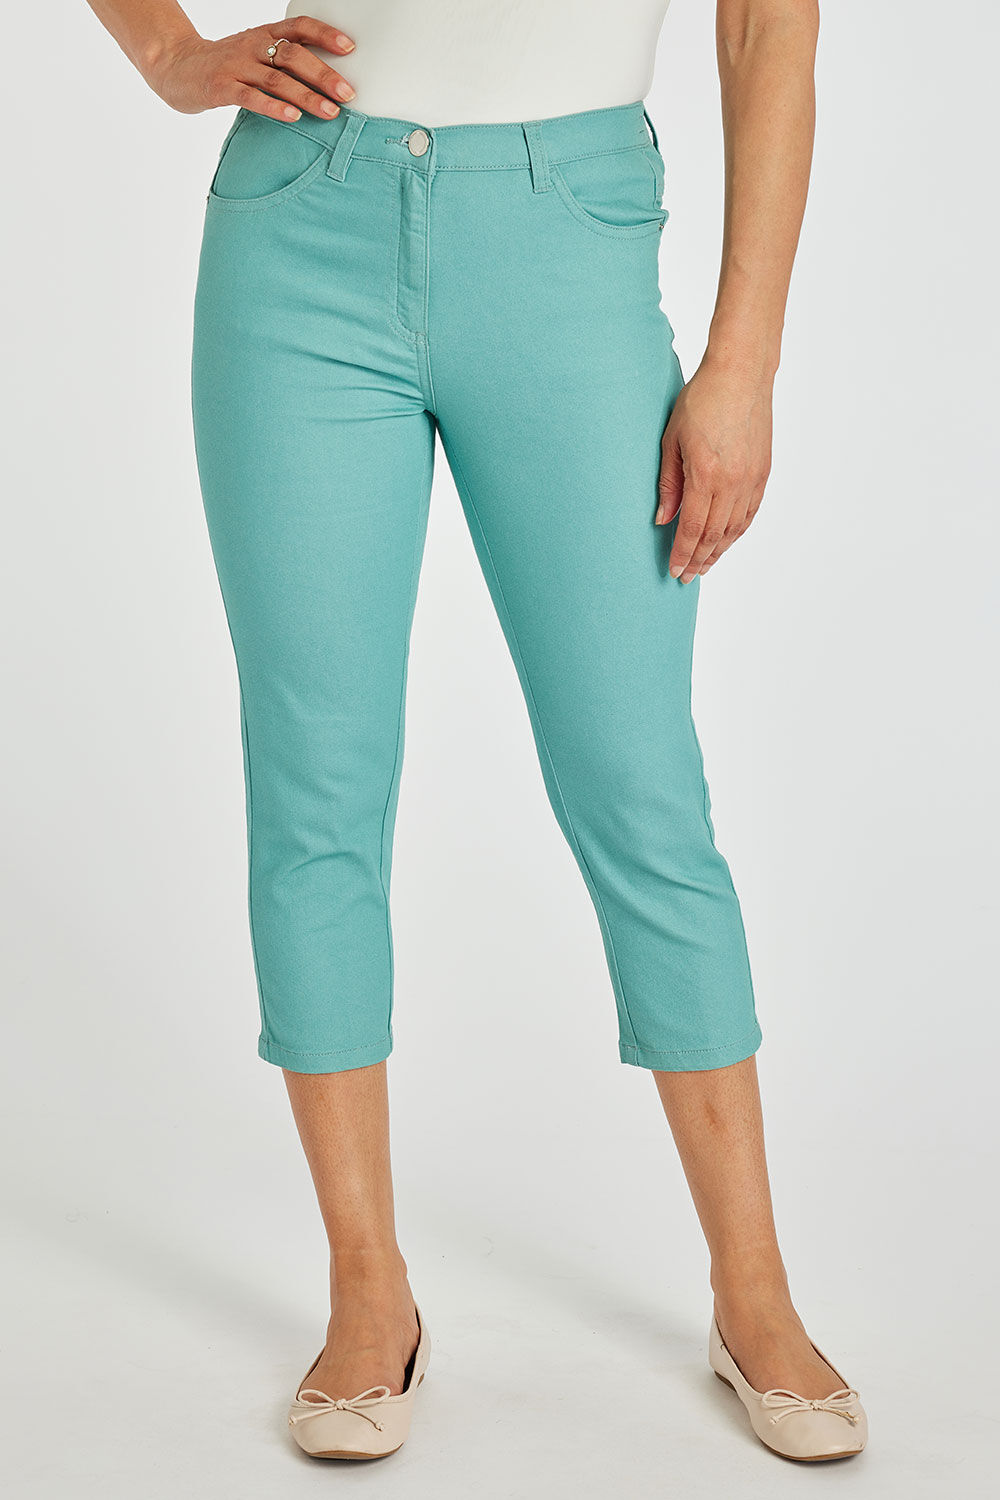 Bonmarche Teal The Sara Coloured Cropped Jeans, Size: 28